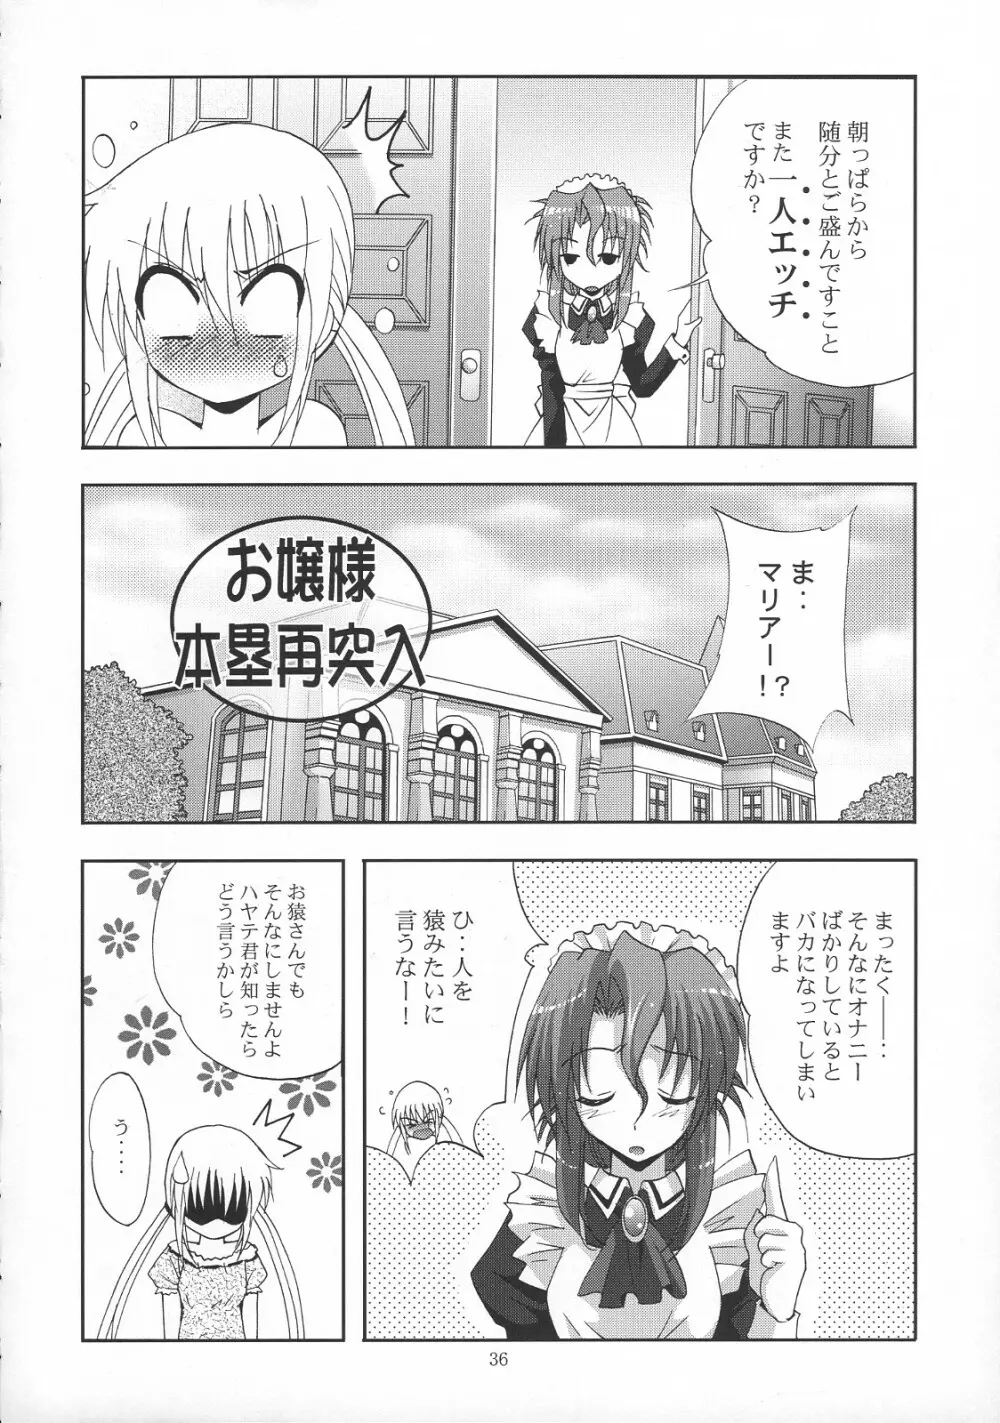 MOUSOU THEATER 21 35ページ